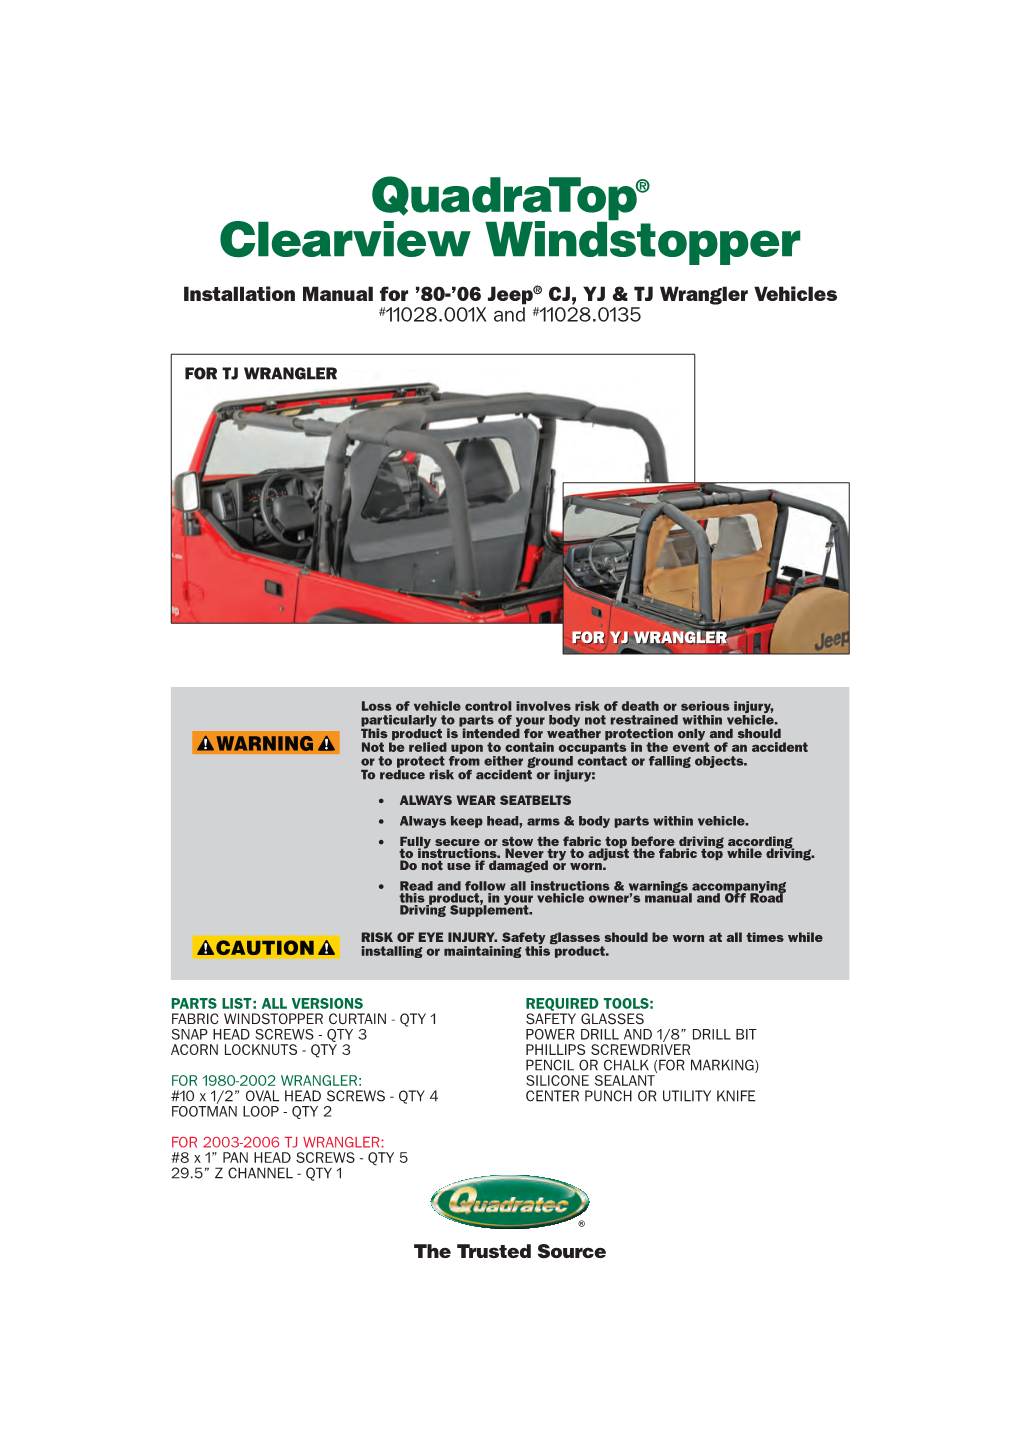 Quadratop® Clearview Windstopper Installation Manual for ’80-’06 Jeep® CJ, YJ & TJ Wrangler Vehicles #11028.001X and #11028.0135